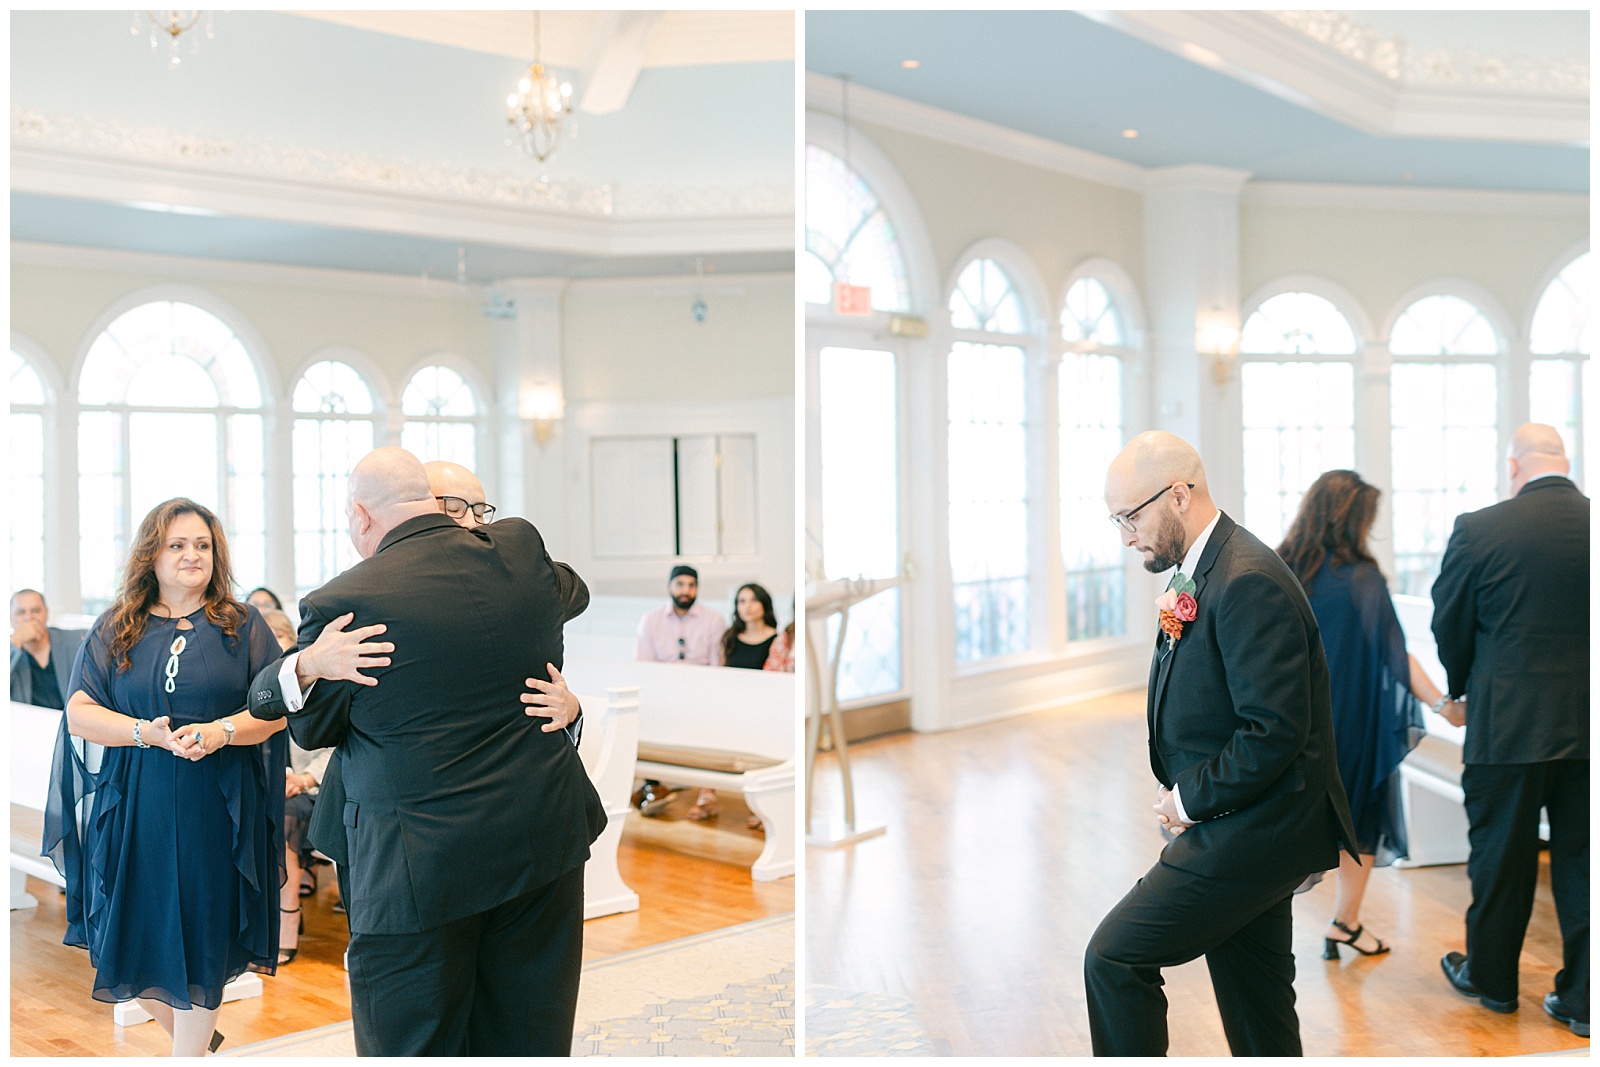 Left: Groom hugs father before parents sit down for wedding ceremony
Right: Groom heads up to the alter for the wedding ceremony
By Elizabeth Kane Photography in Orlando Florida